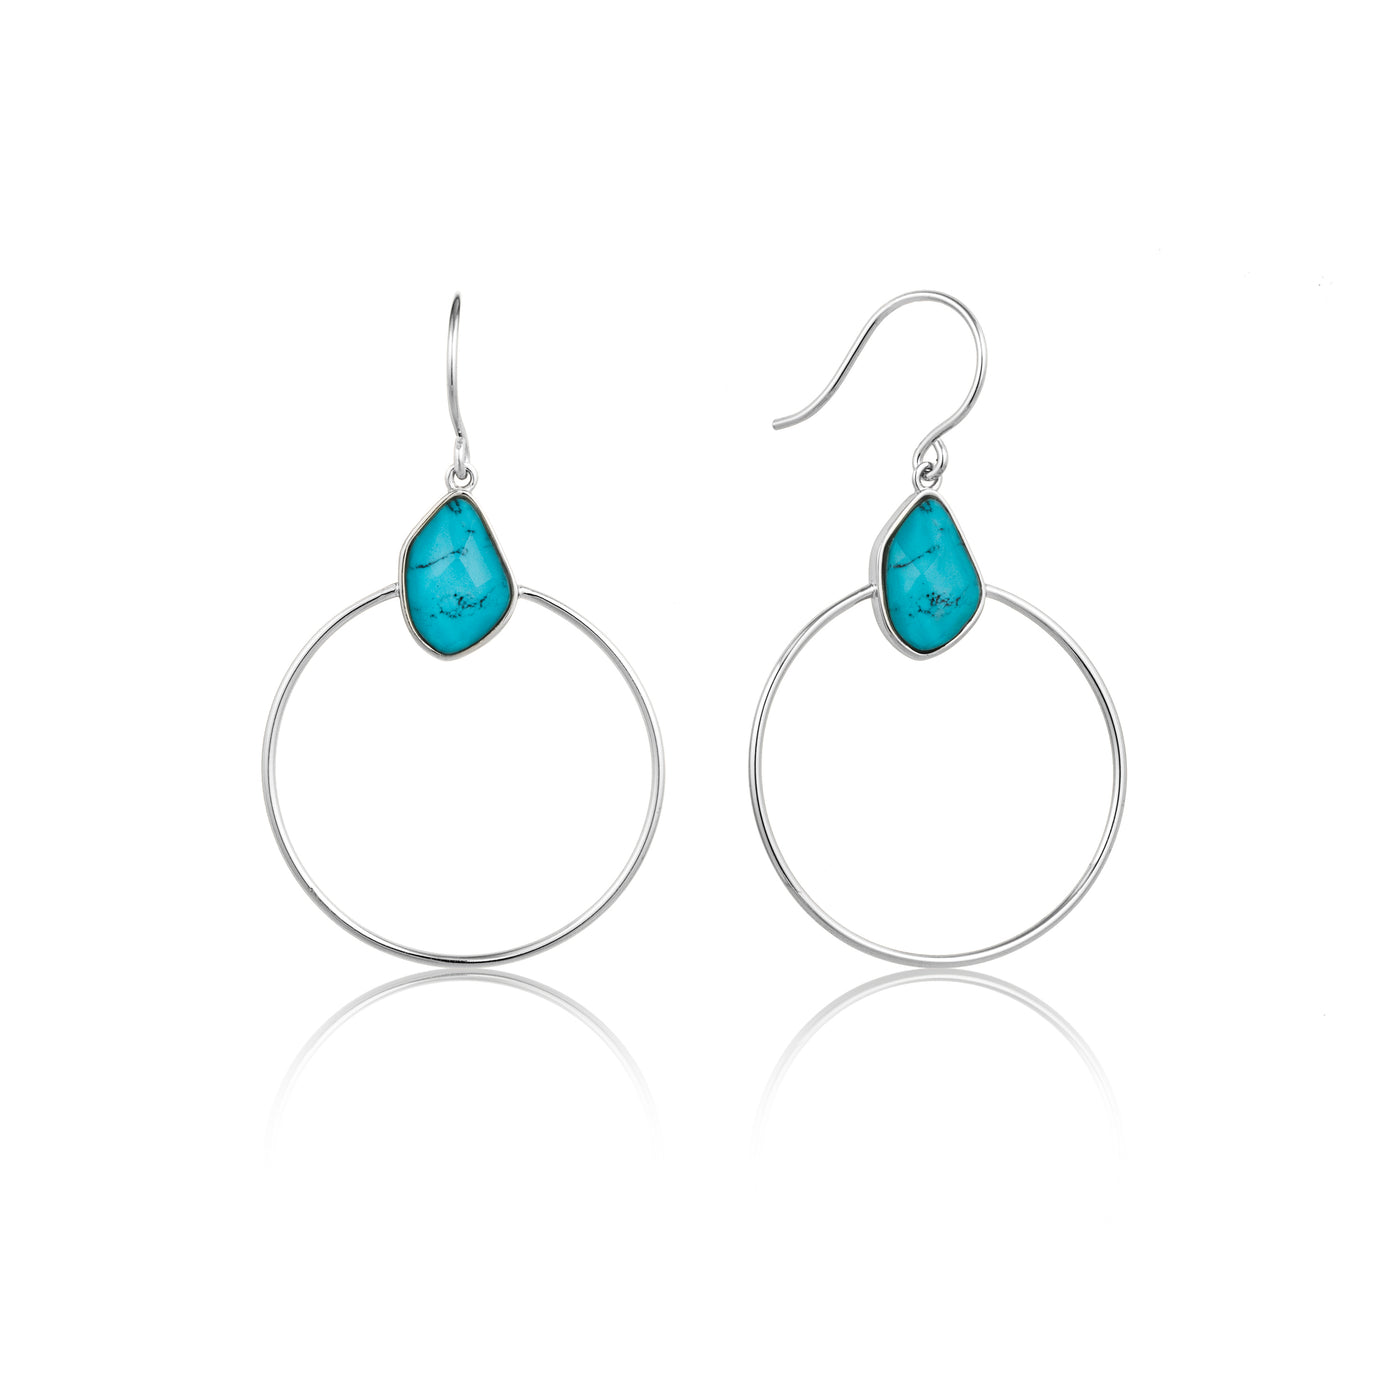 Ania Haie Turquoise Front Hoop Silver Plated Earrings E014-02G E014-02H